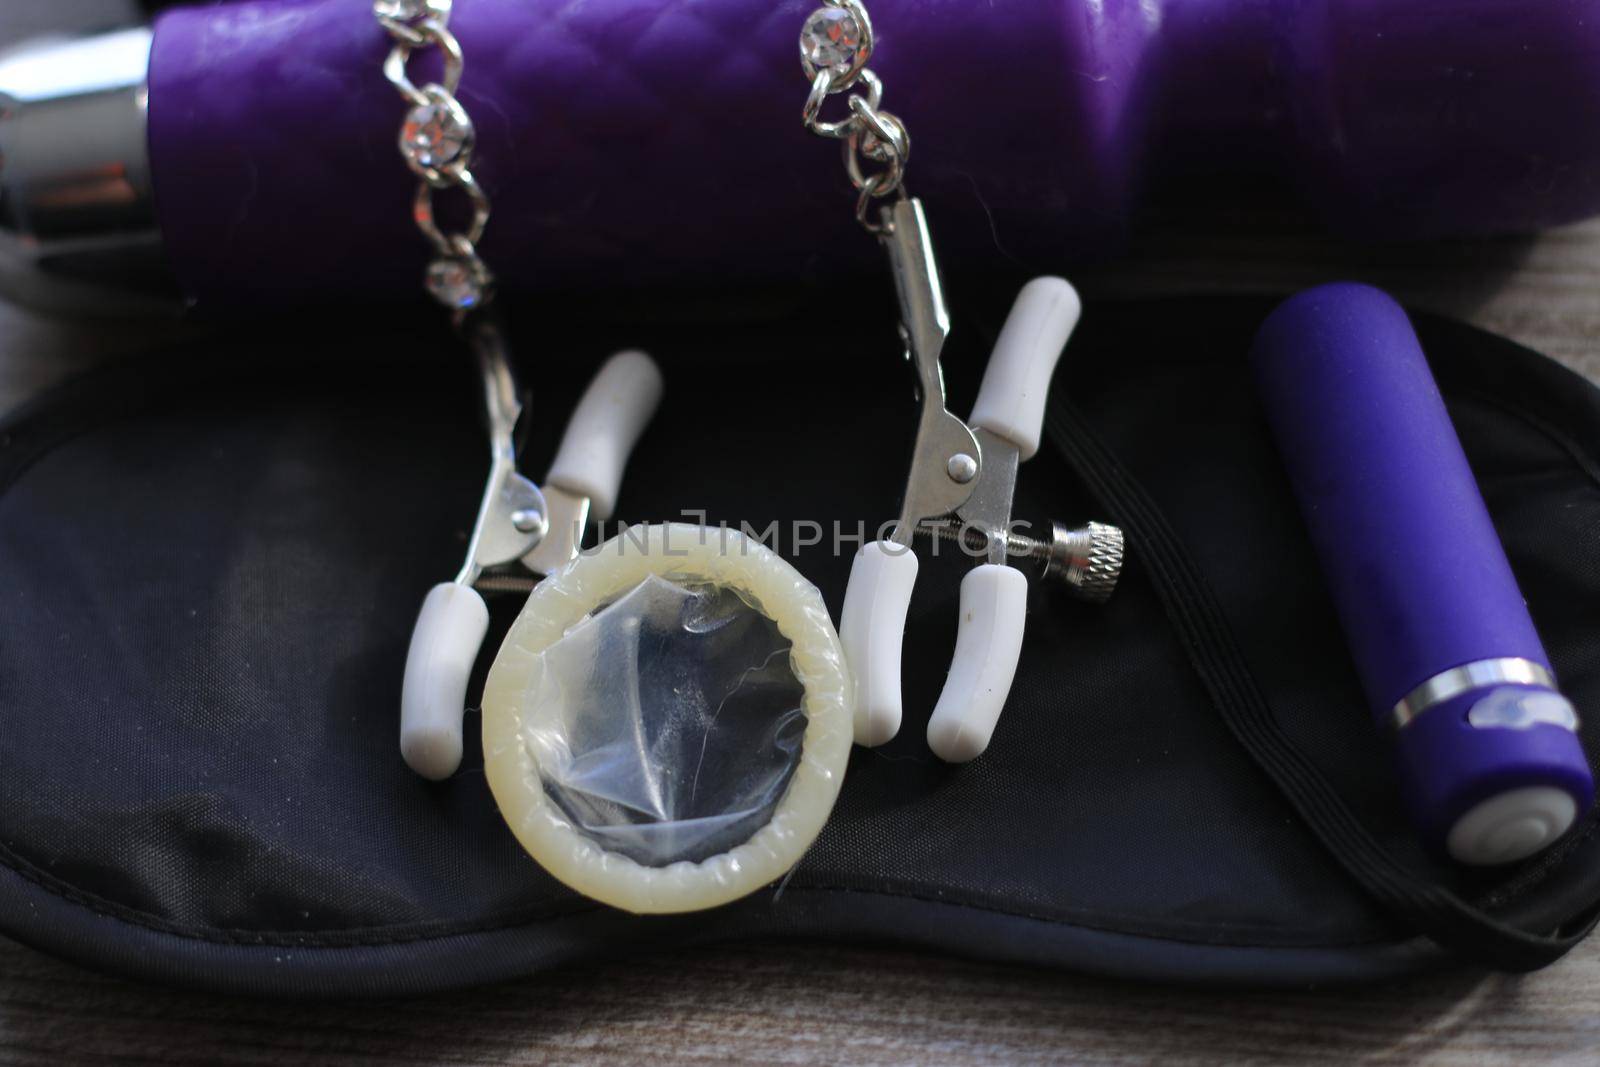 BDSM themed images showing a large dildo, nipple clamps, restraints, eye covers, and a condom by mynewturtle1